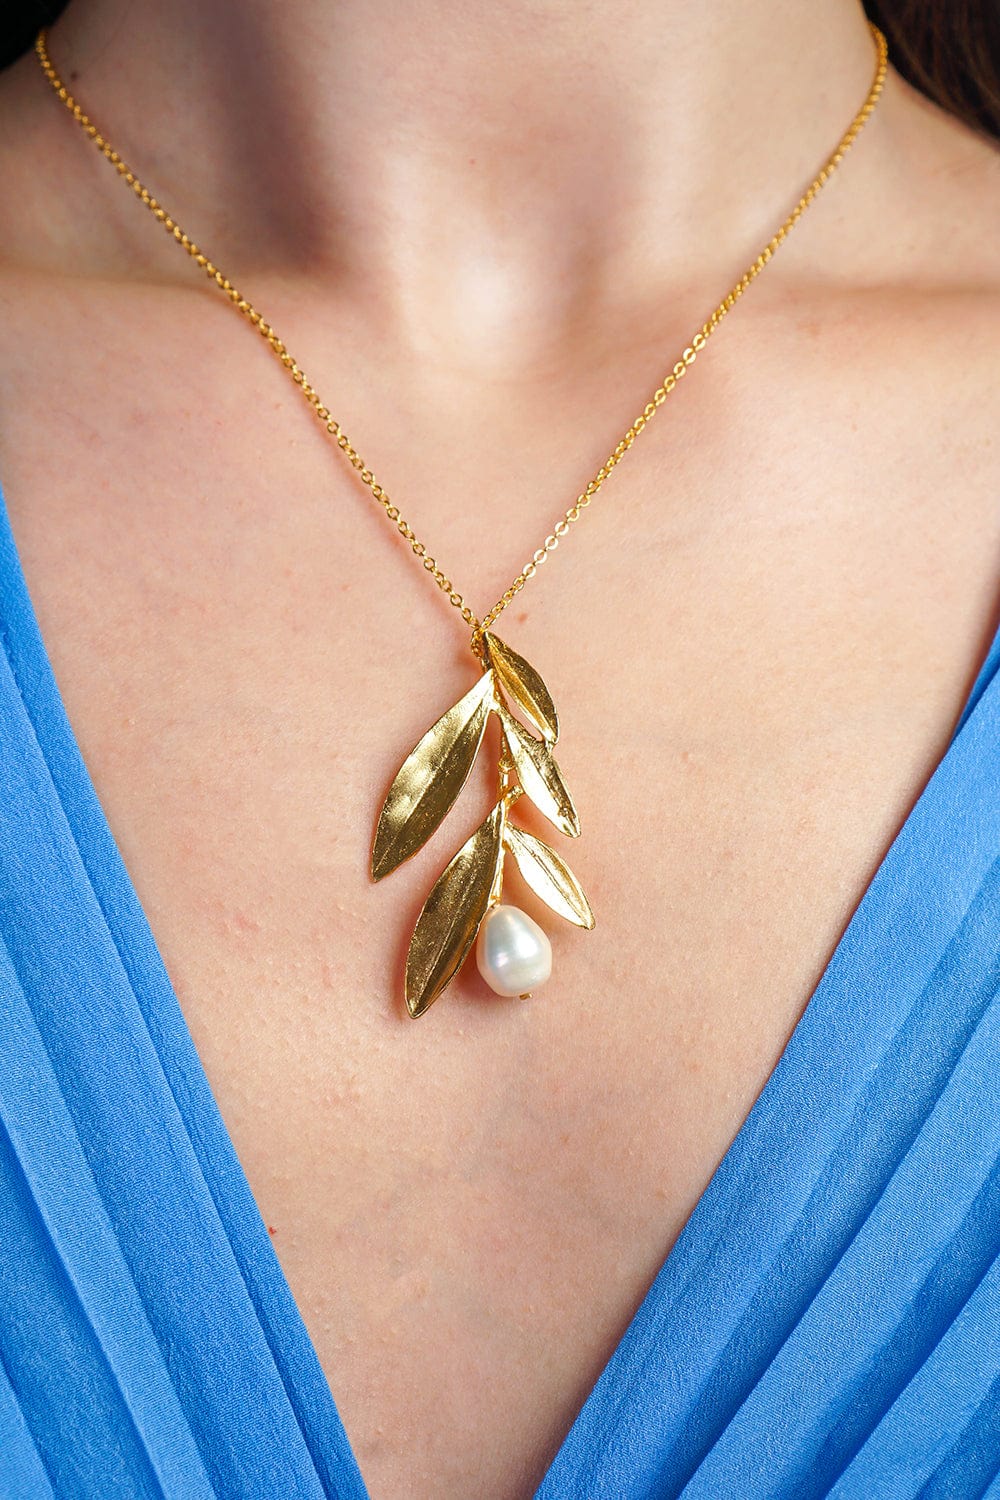 DCD NECKLACES Layered Leaf Drop Gold-plated Necklaces With Pearl